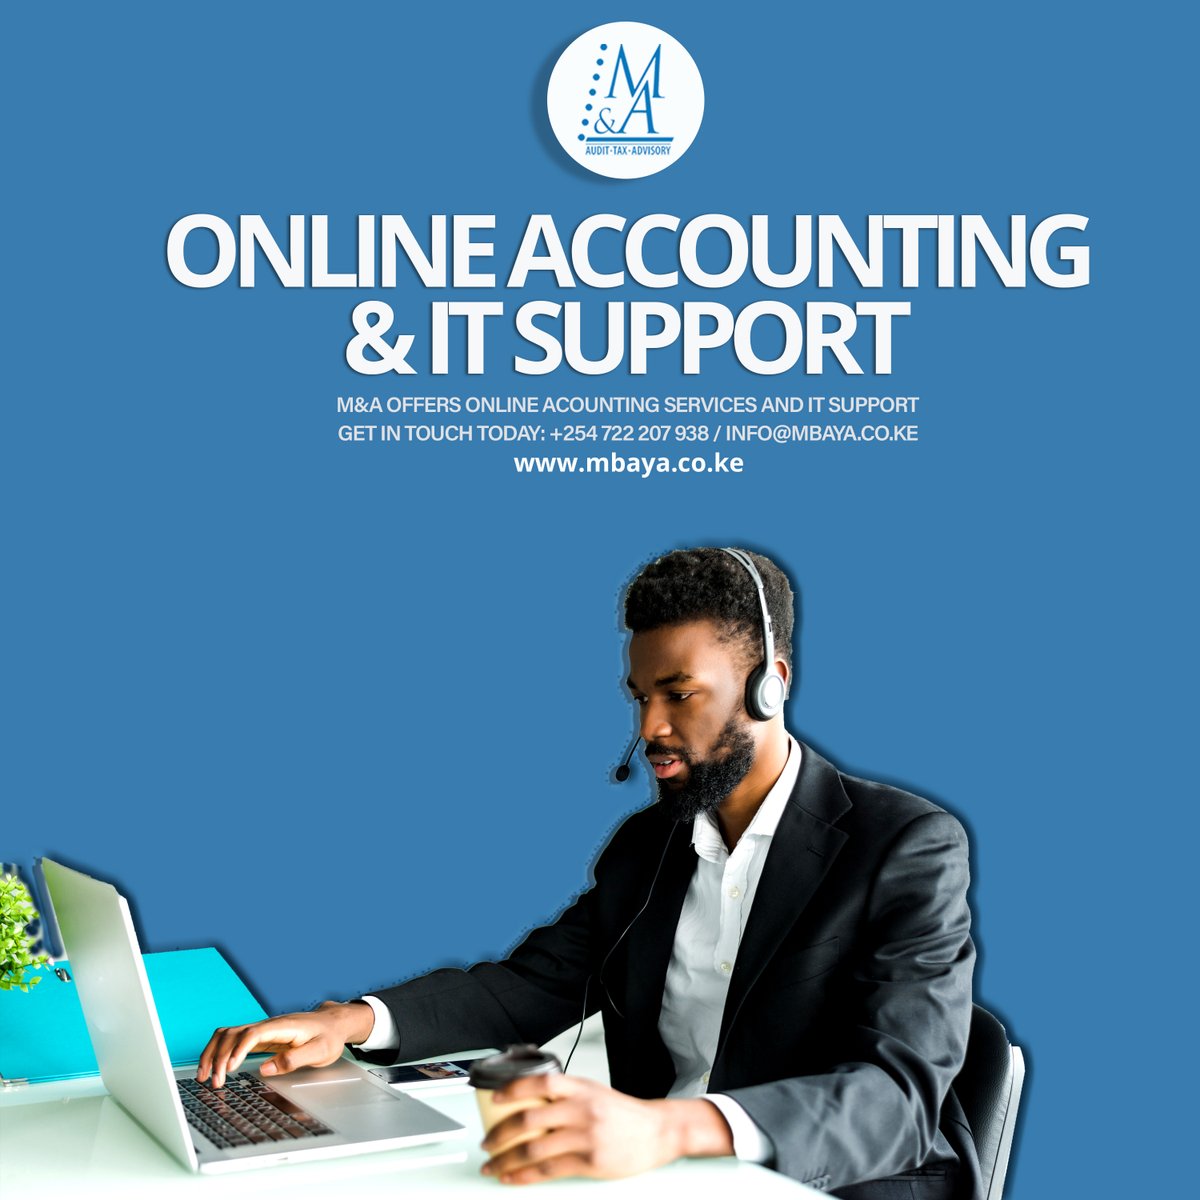 Experts in accounting
#onlineaccounting
#mbayanassociates
#linkedln
#Accountants